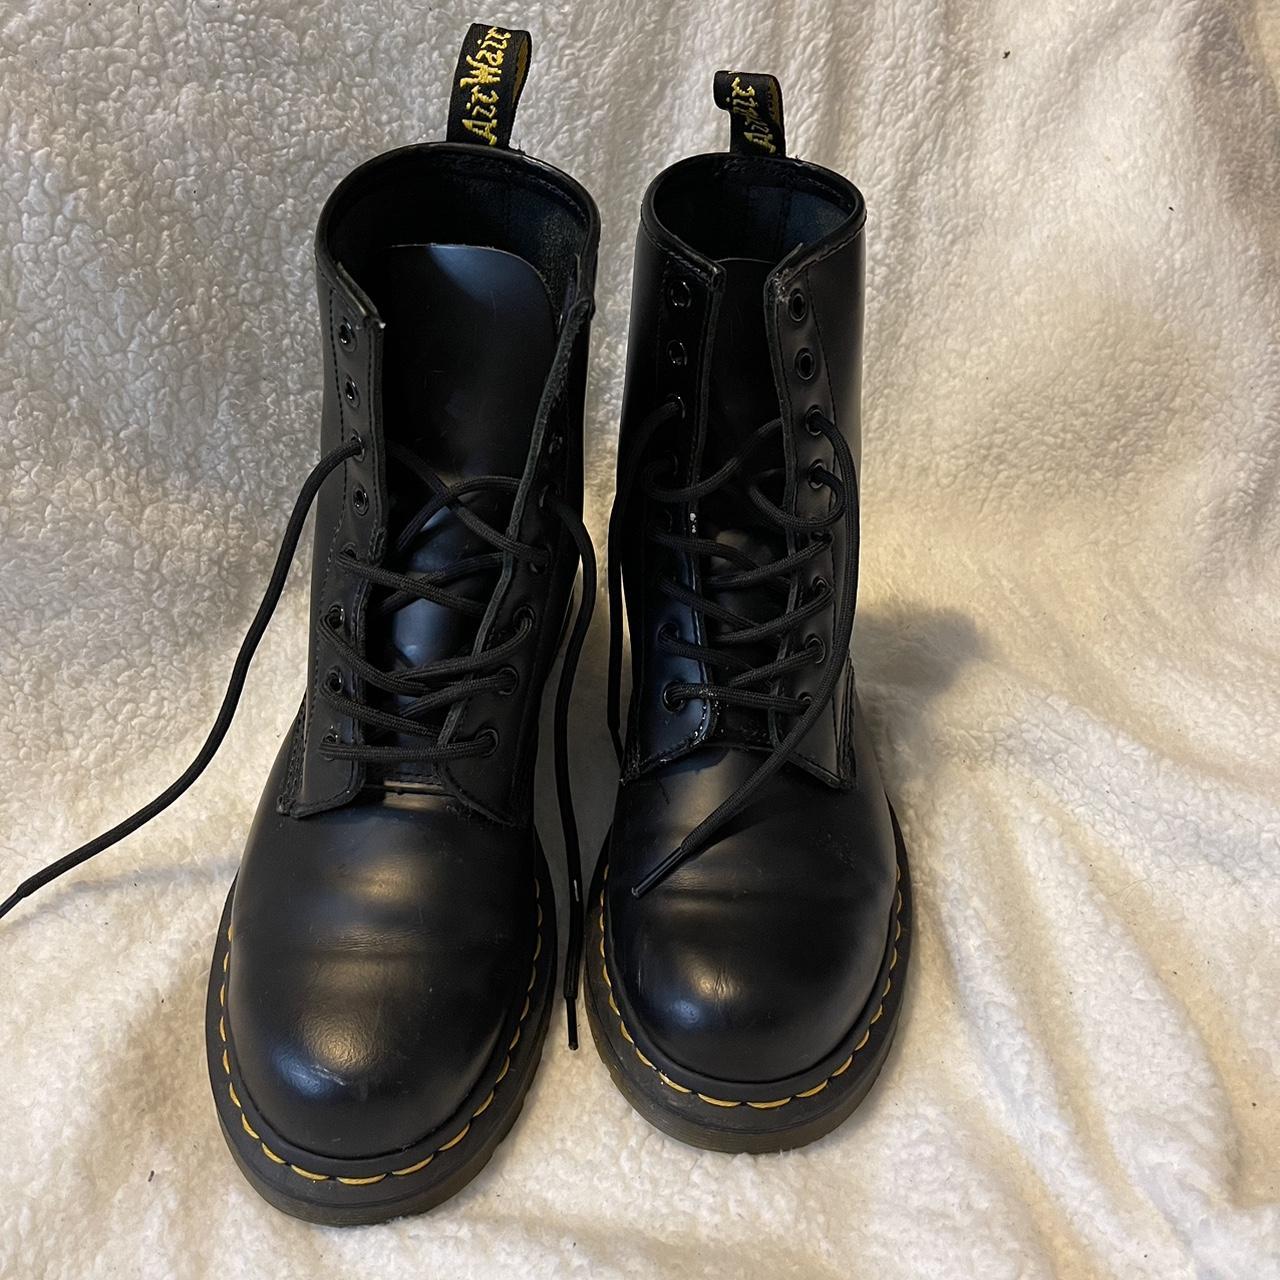 Dr. Martens Bex Smooth Leather Boots Size 10W Worn... - Depop